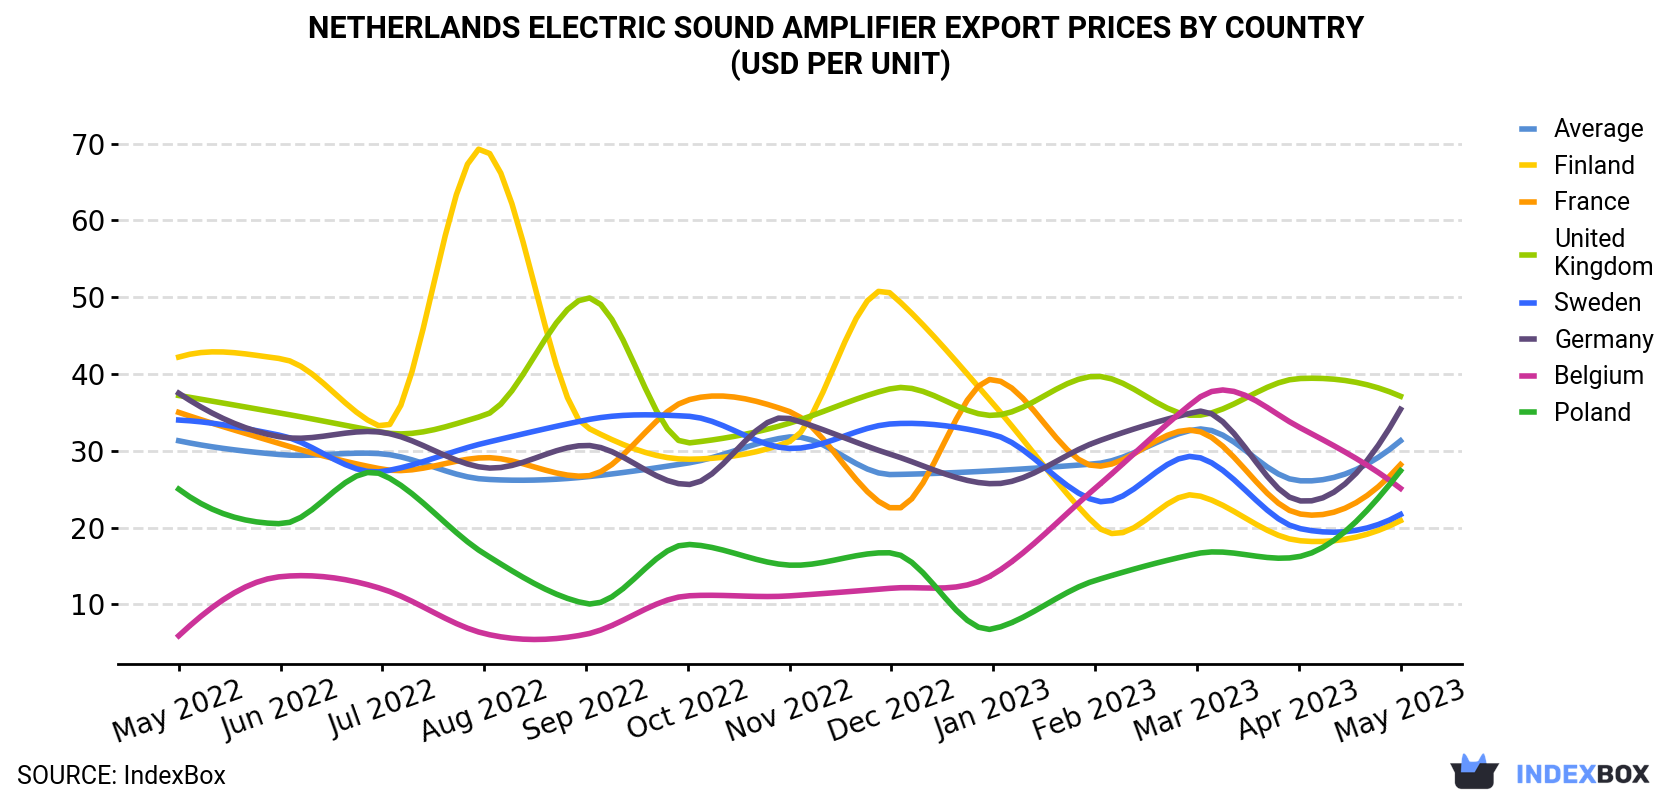 Netherlands Electric Sound Amplifier Export Prices By Country (USD Per Unit)